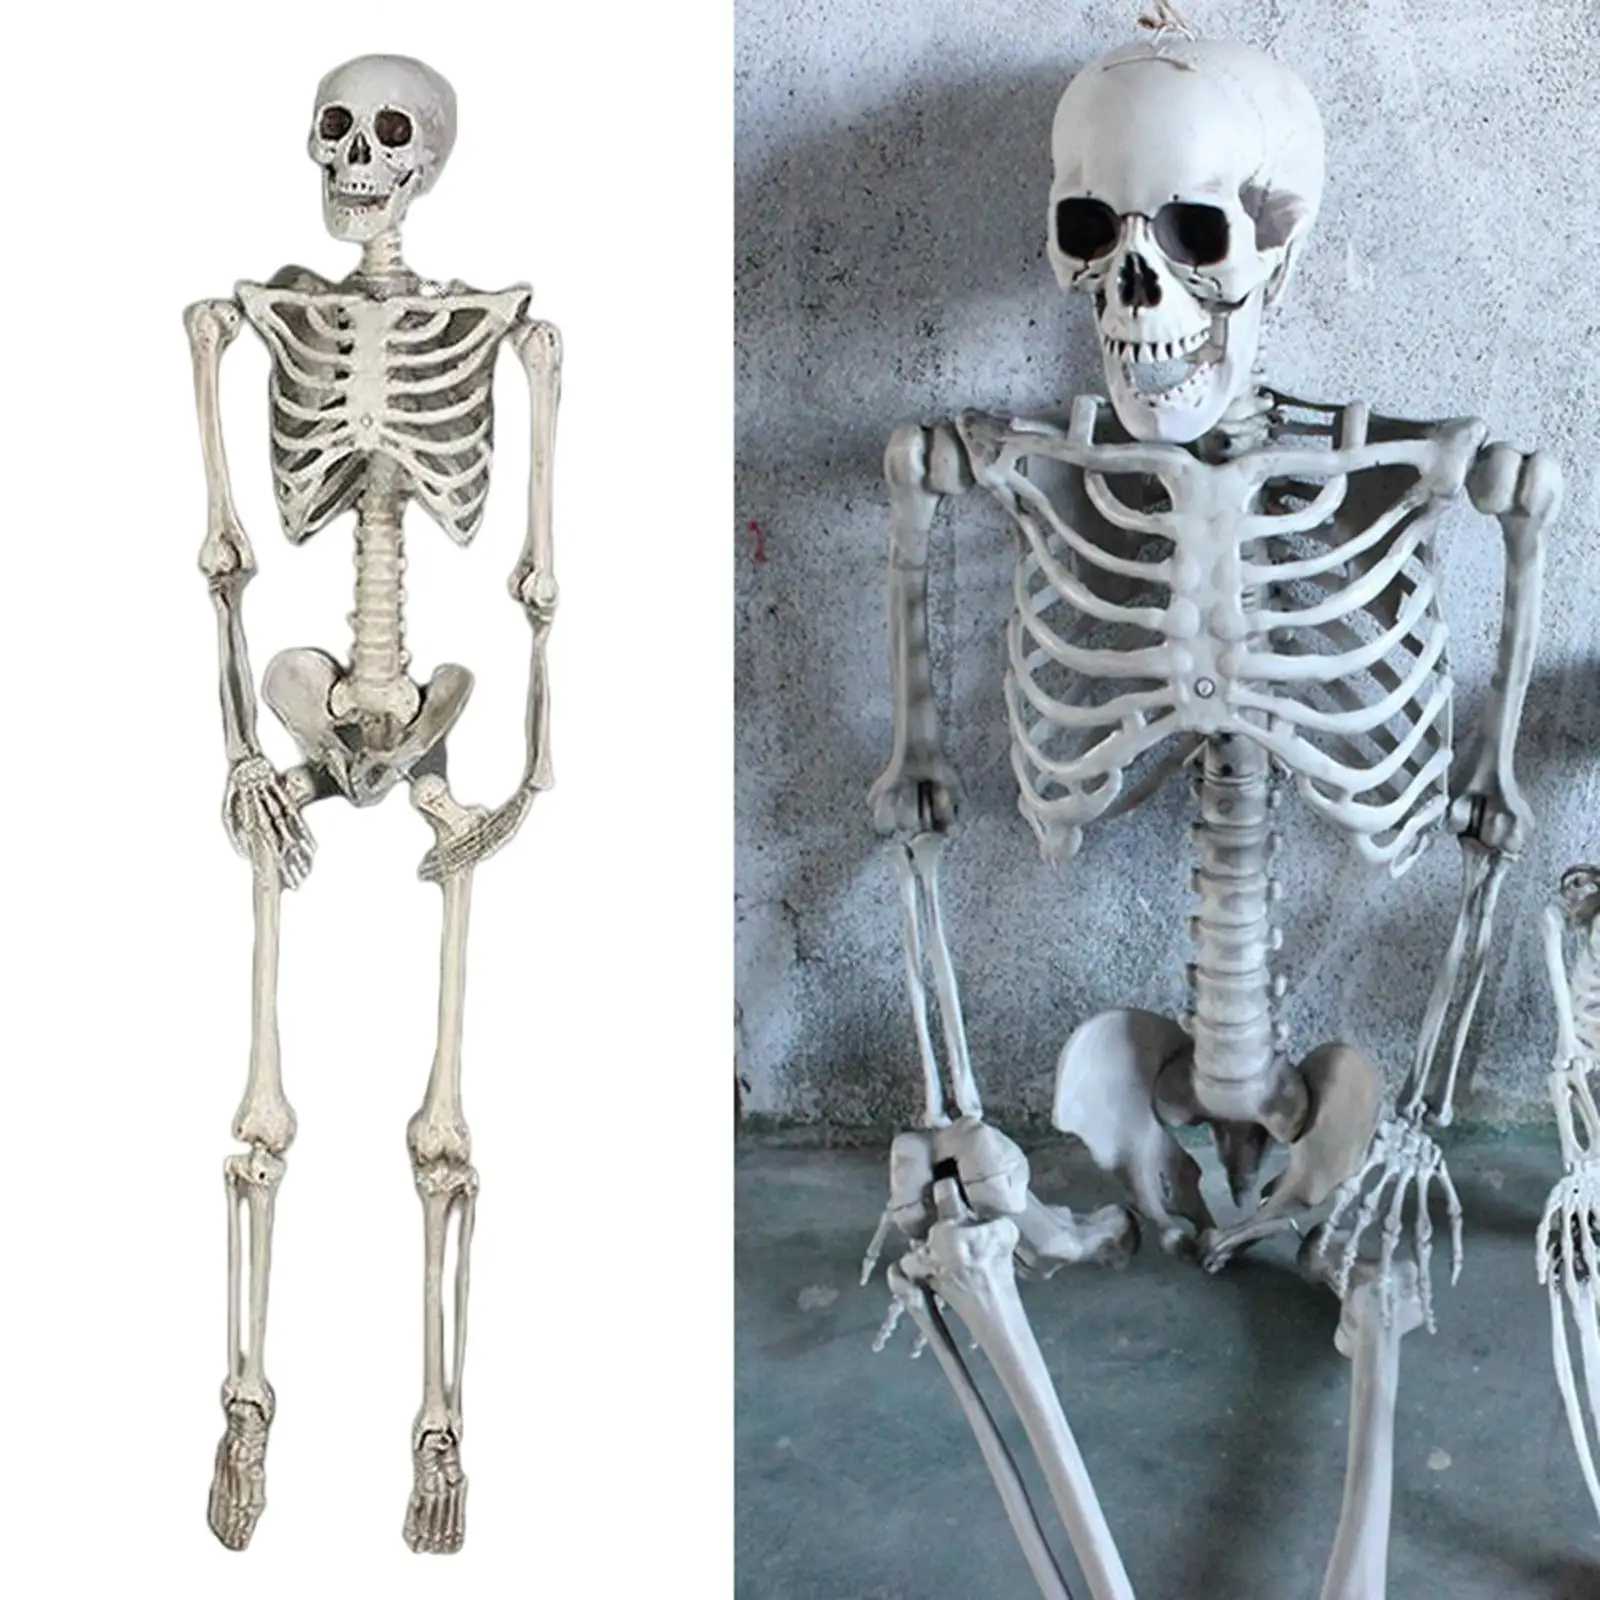 185cm Simulation Skeleton Novelty Decor Scene Layout Accessories Gifts Collectibles Halloween Props for Parties Haunted House